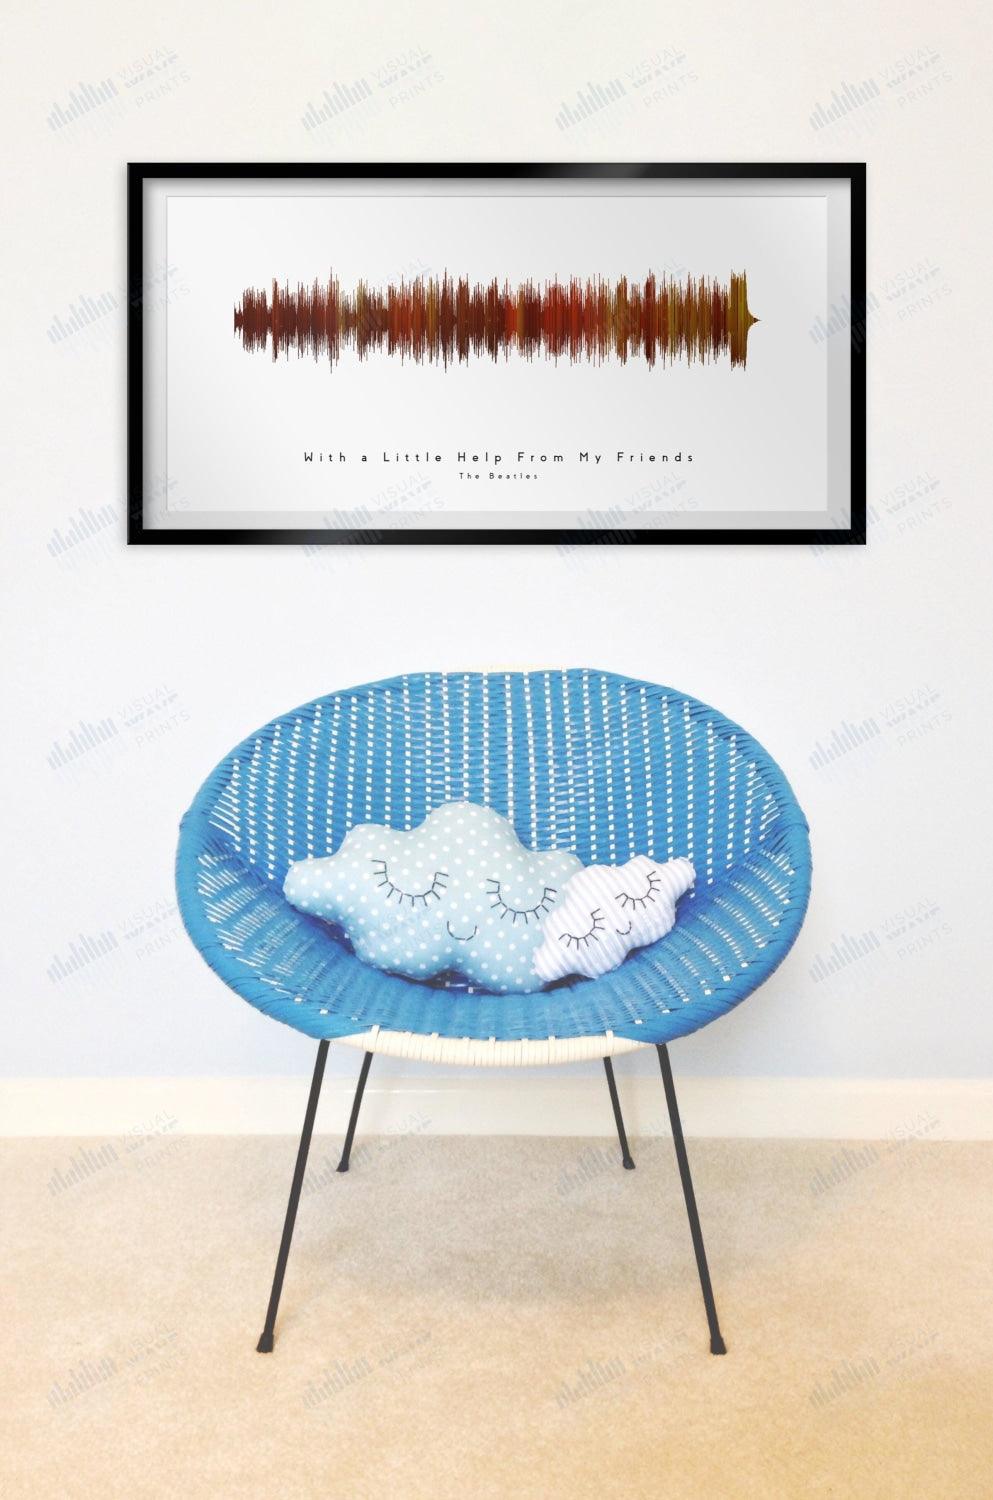 With a Little Help From My Friends by The Beatles - Visual Wave Prints